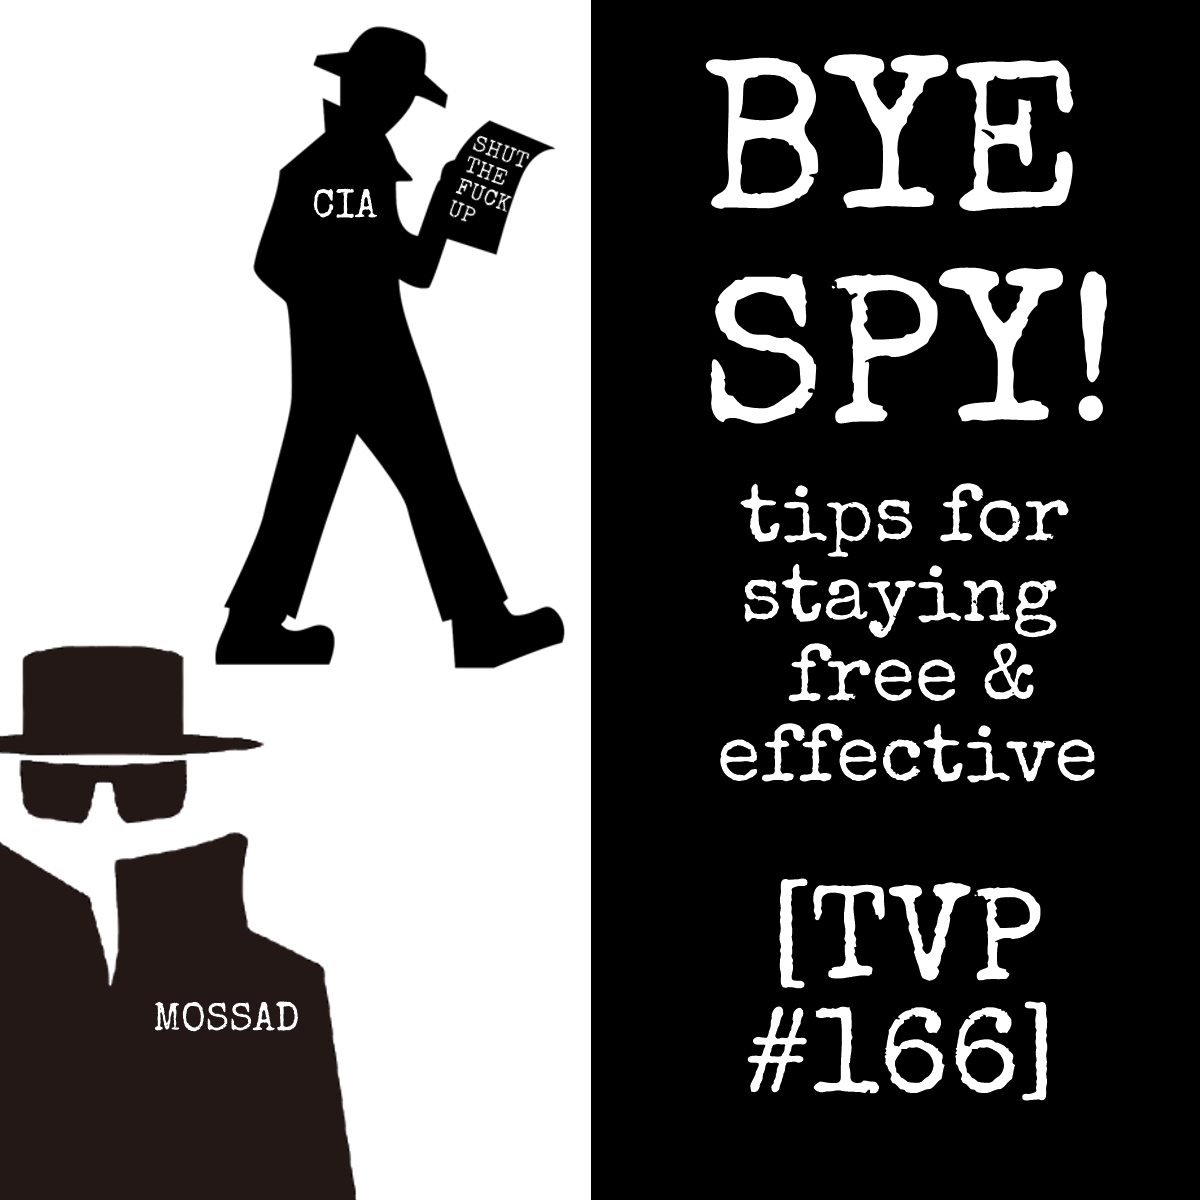 TVP #166: [BYE SPY] TIPS FOR STAYING FREE AND EFFECTIVE